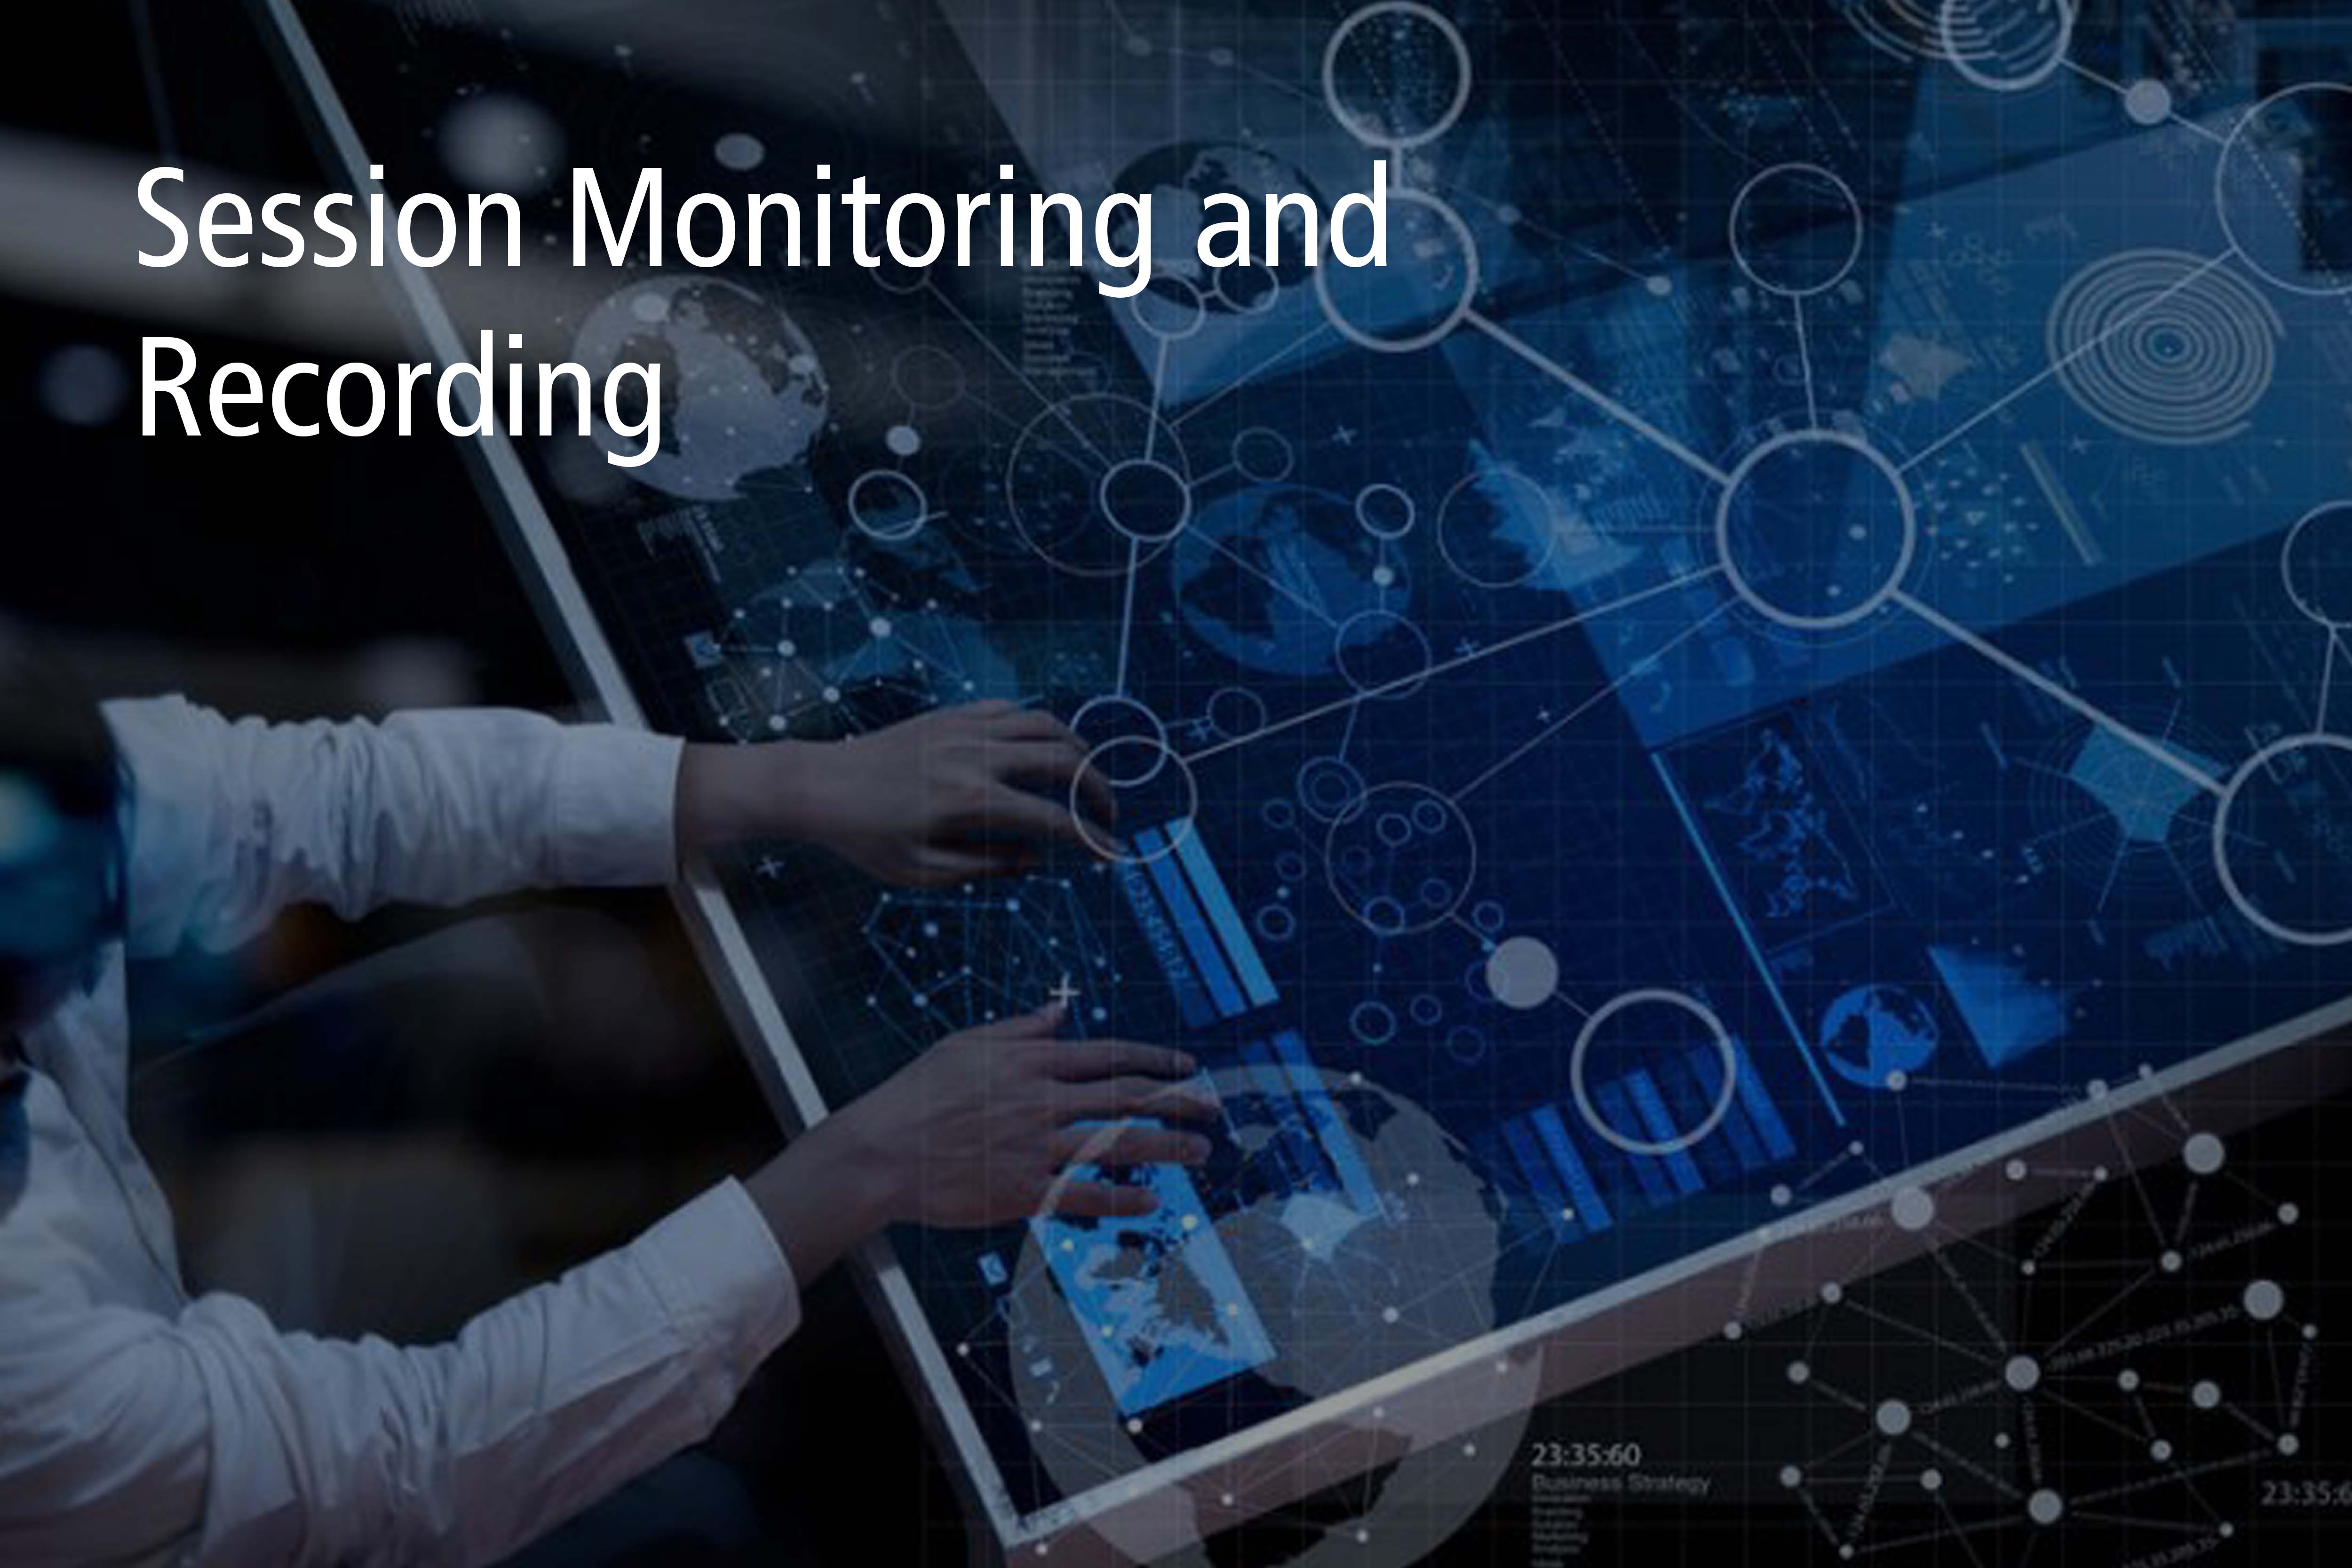 Session Monitoring and Recording